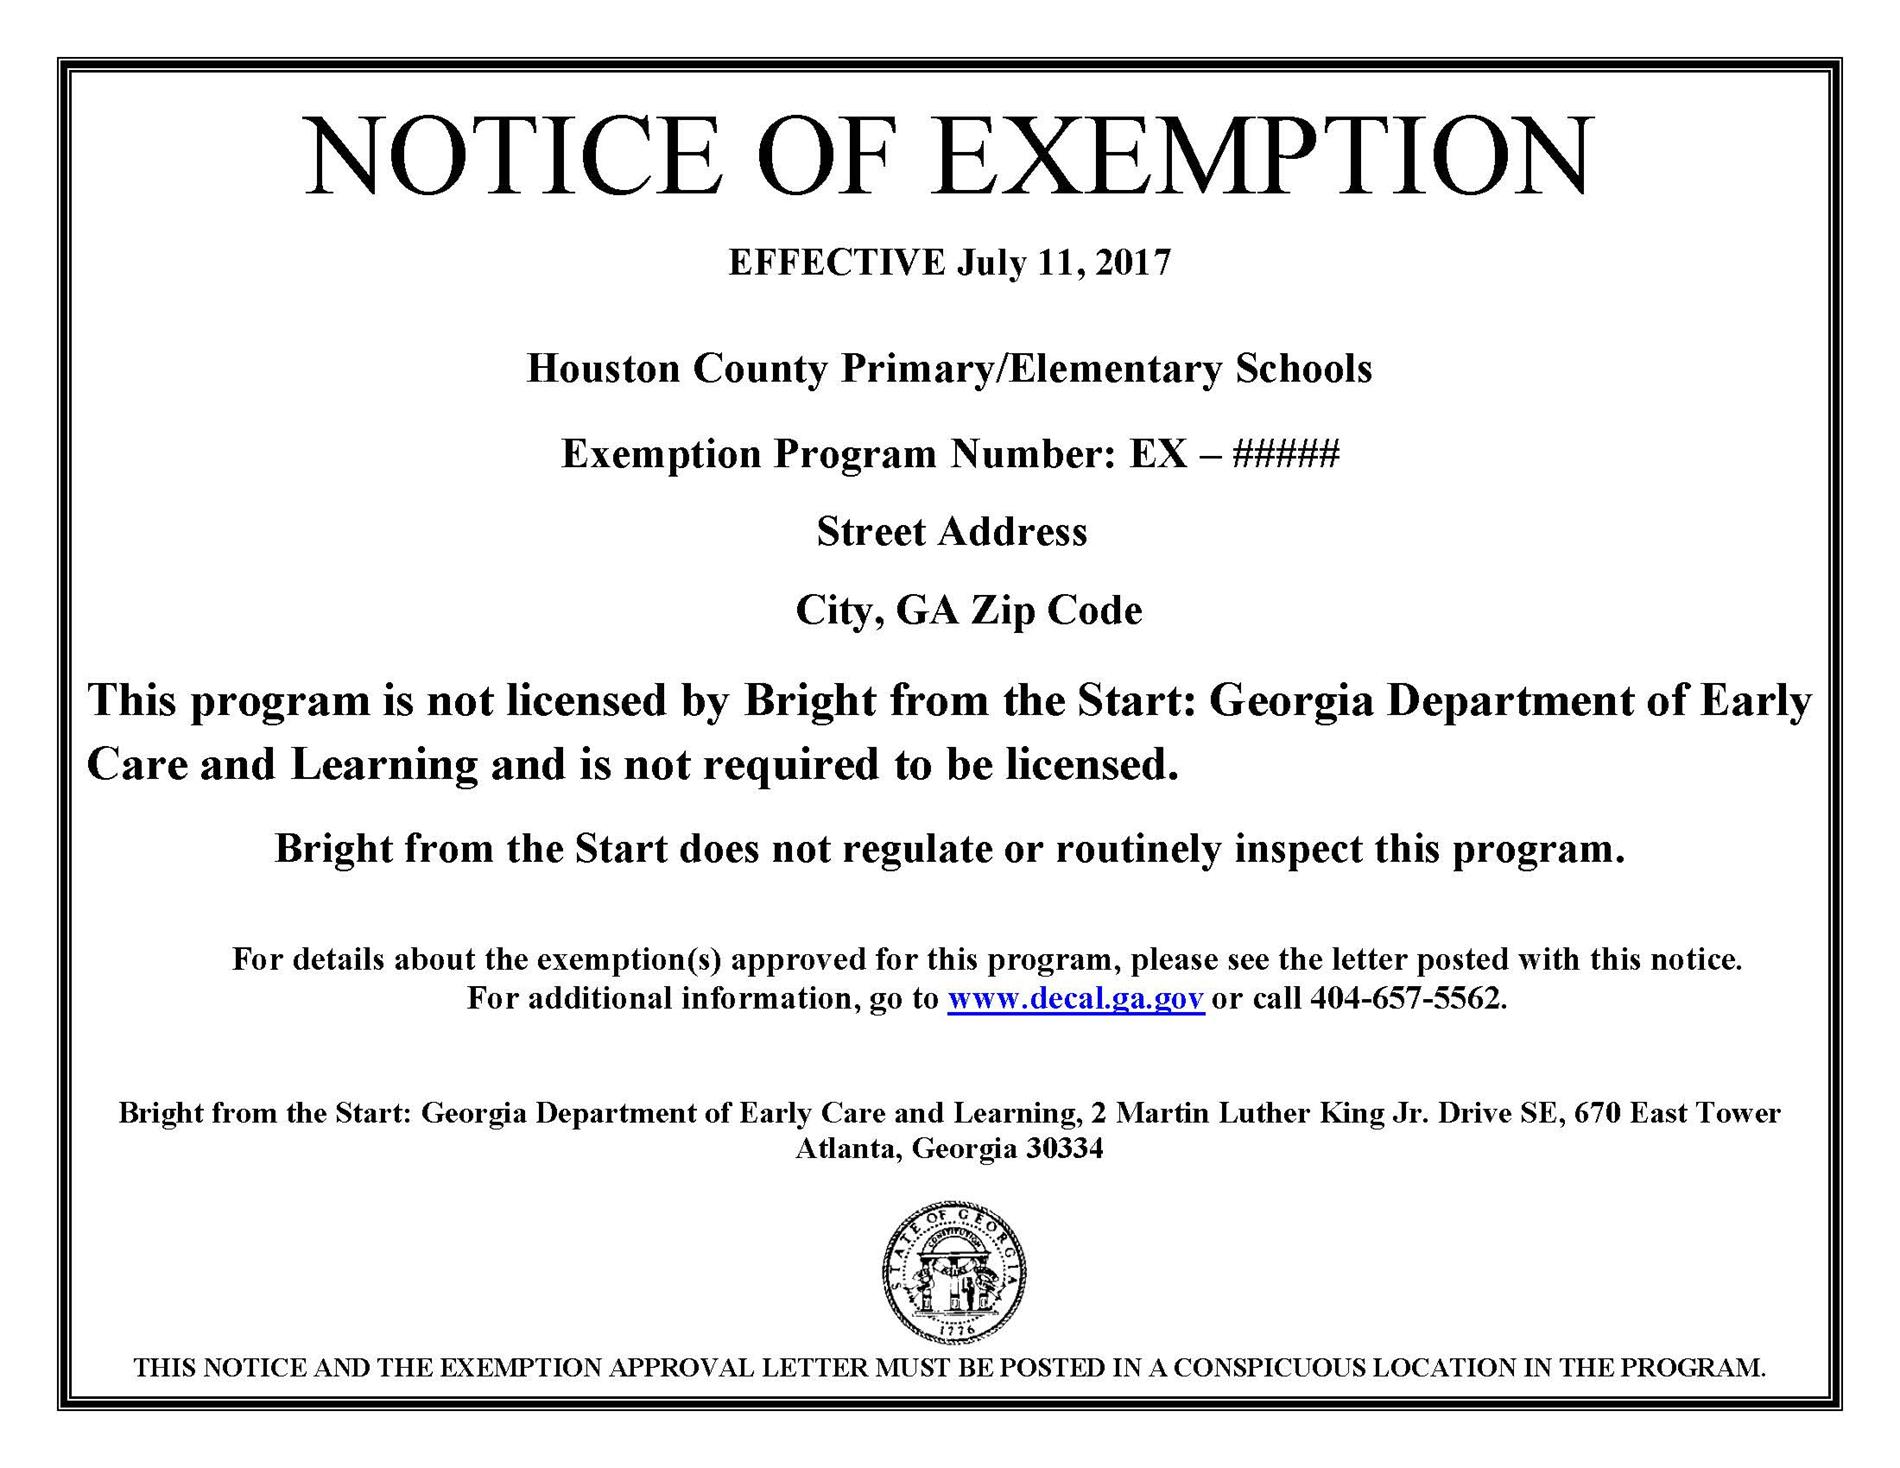 Exemption Certificate for ASP